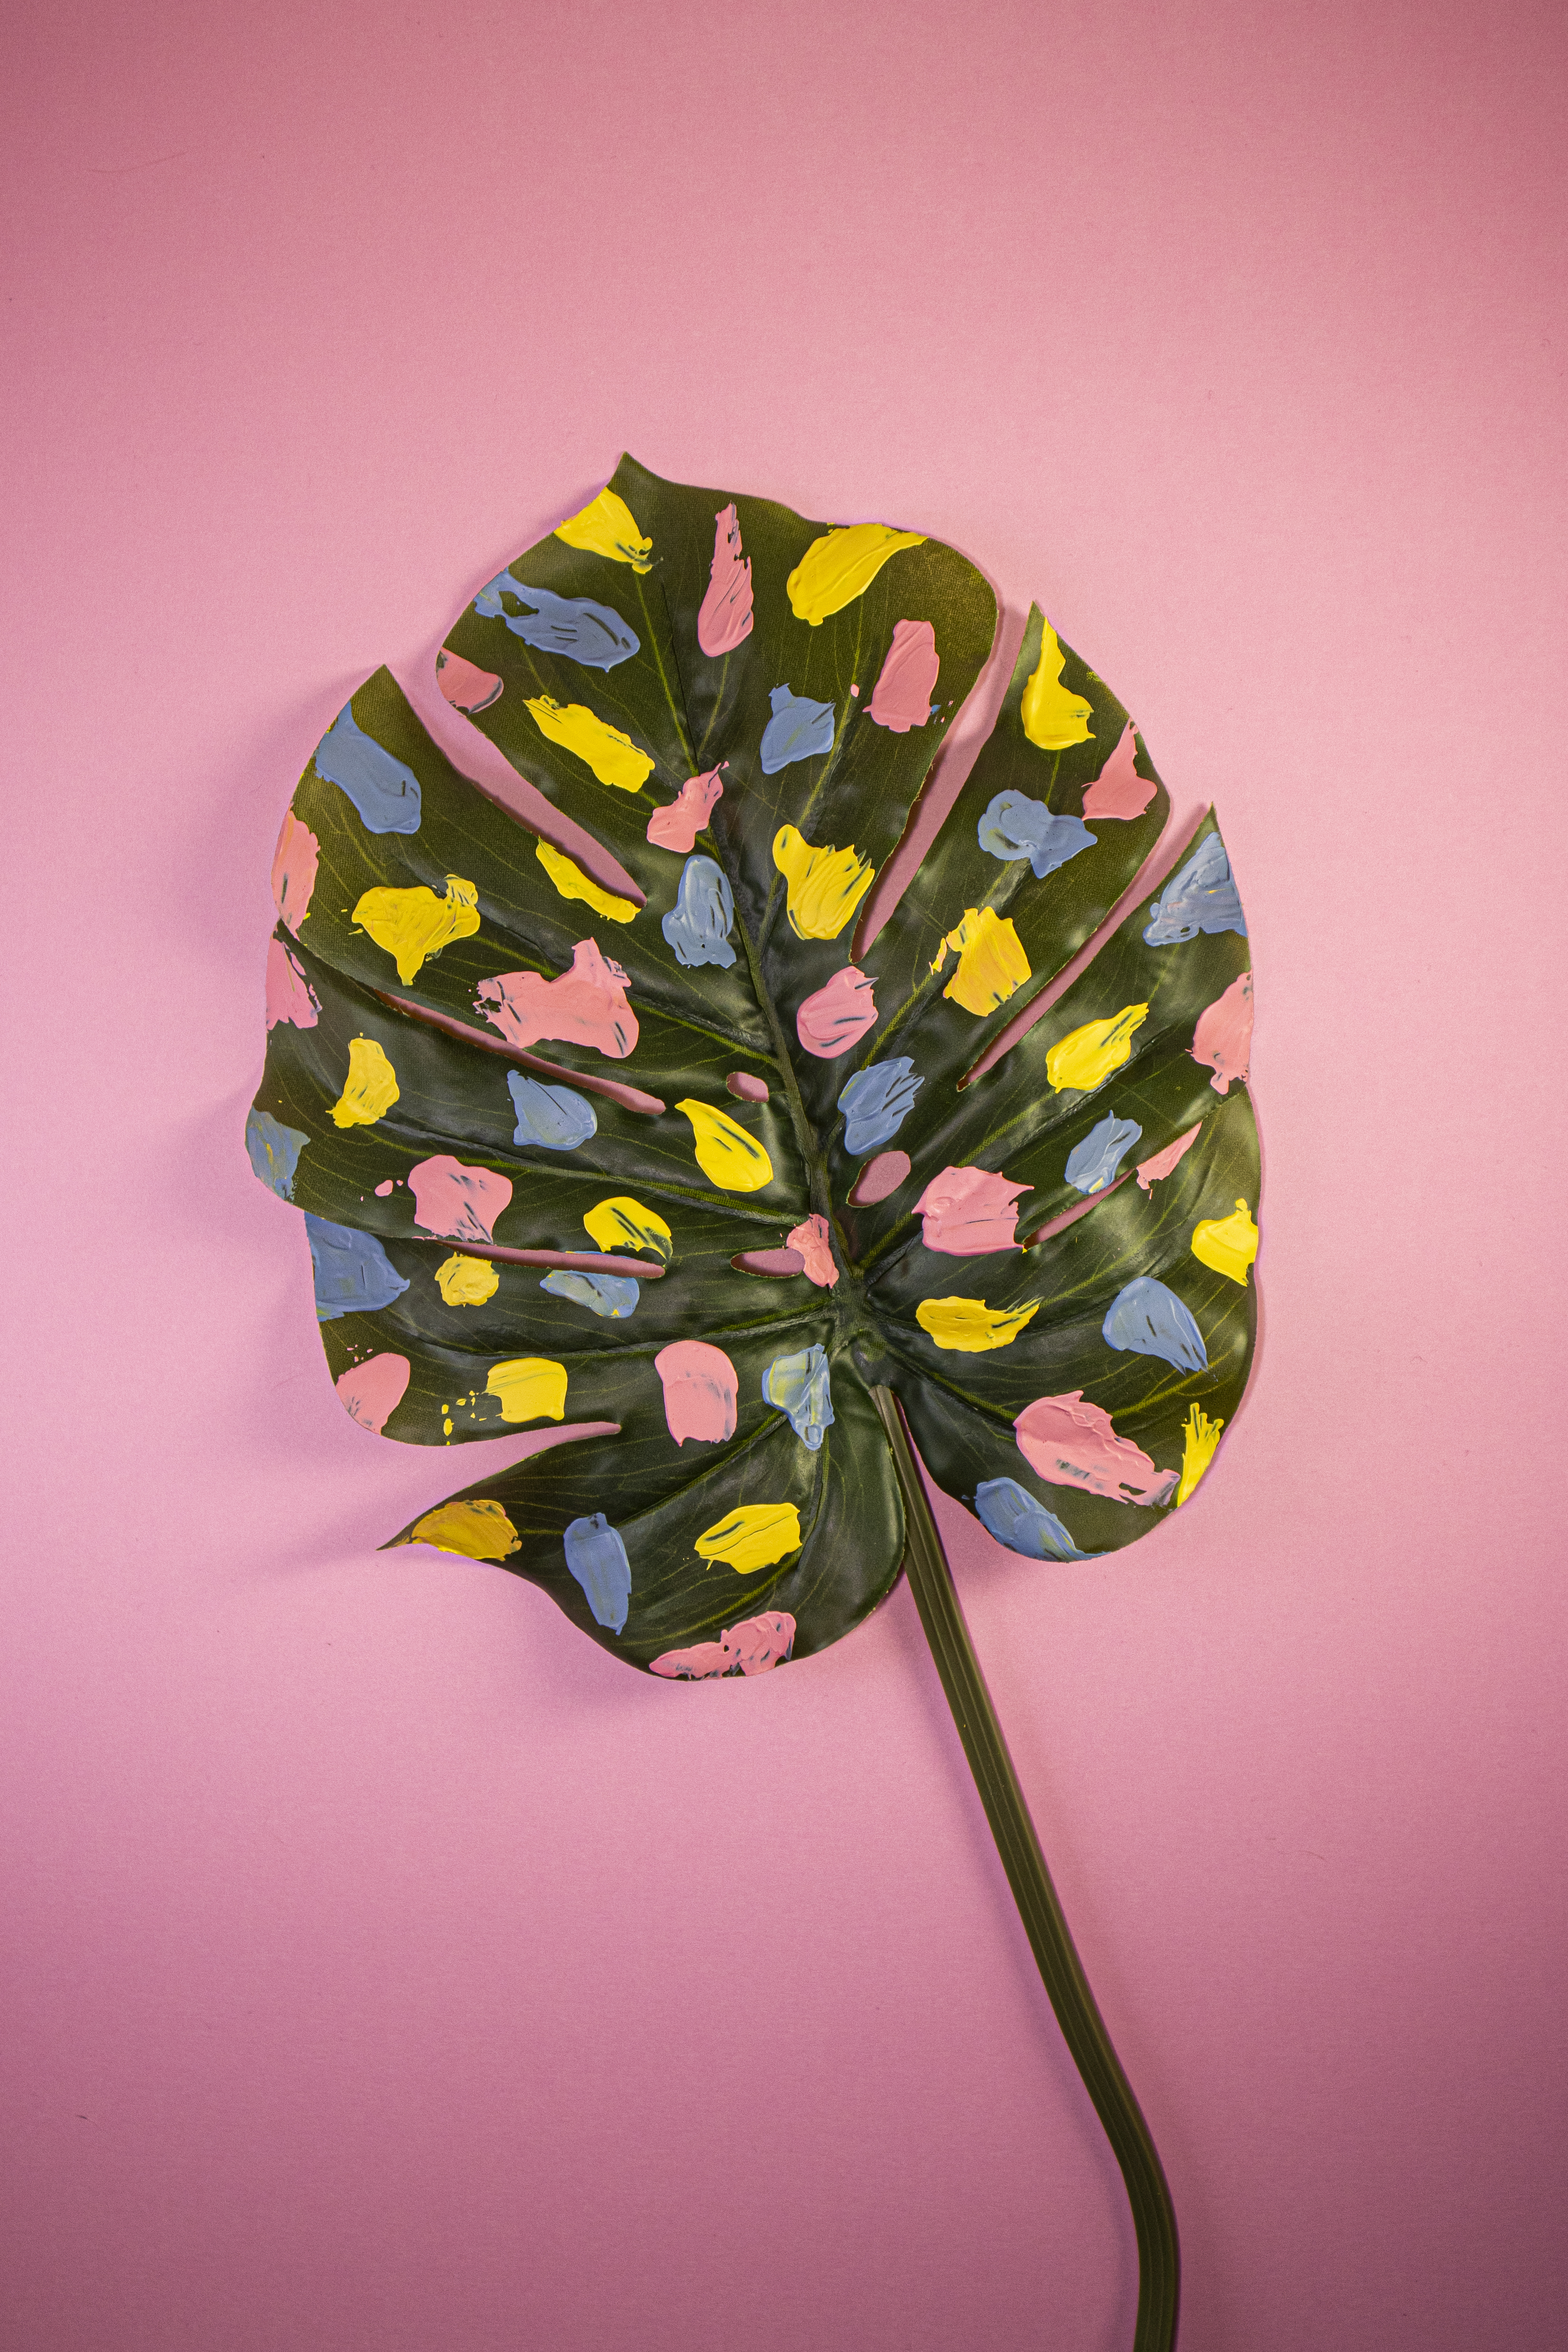 green leaf with pink, yellow, and blue splats of paint on leaf with pink background